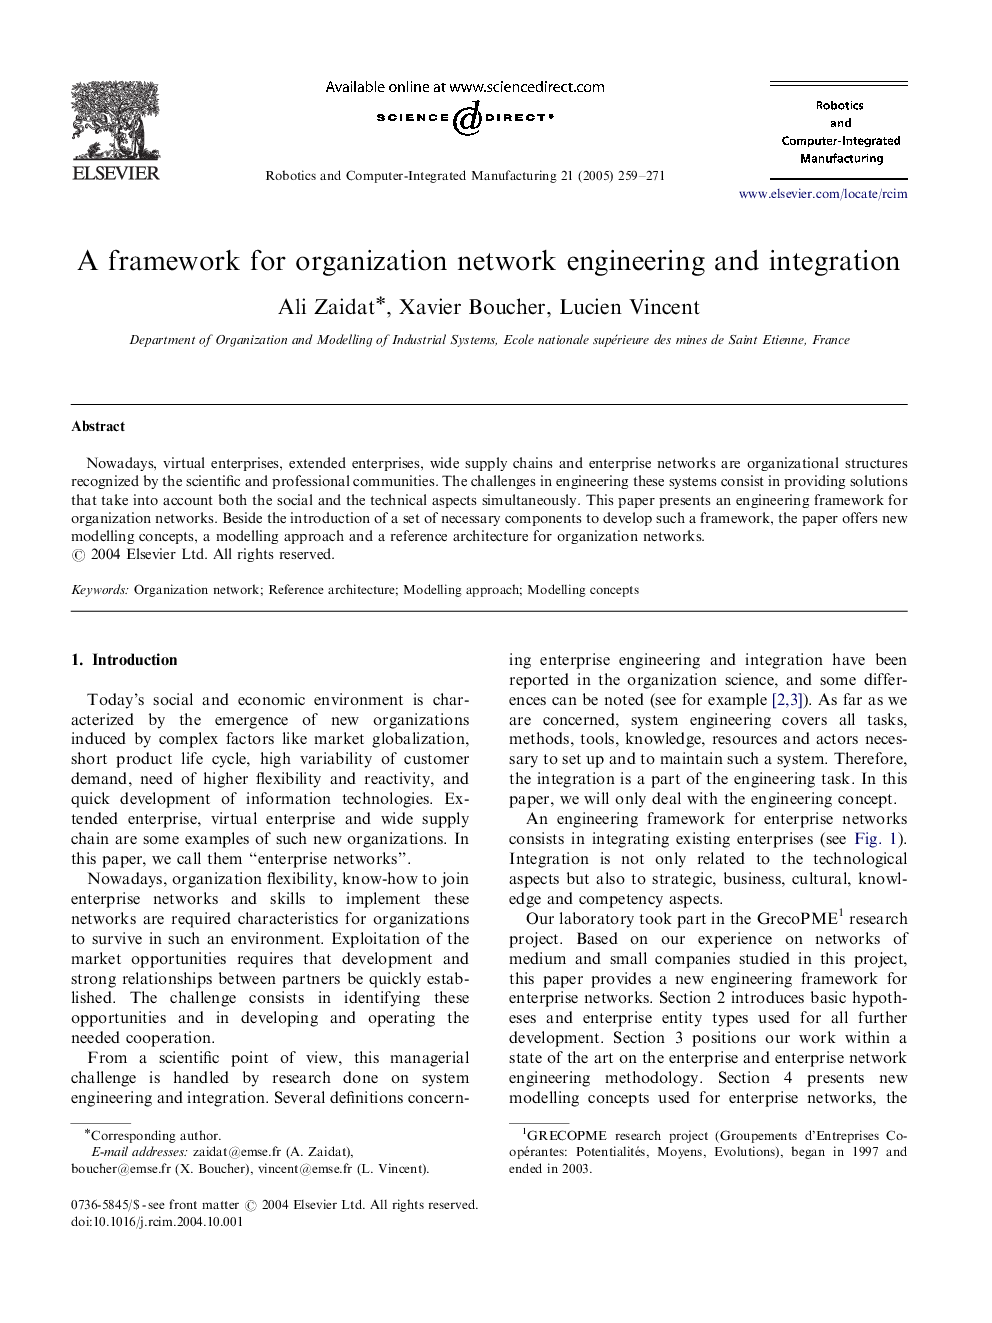 A framework for organization network engineering and integration